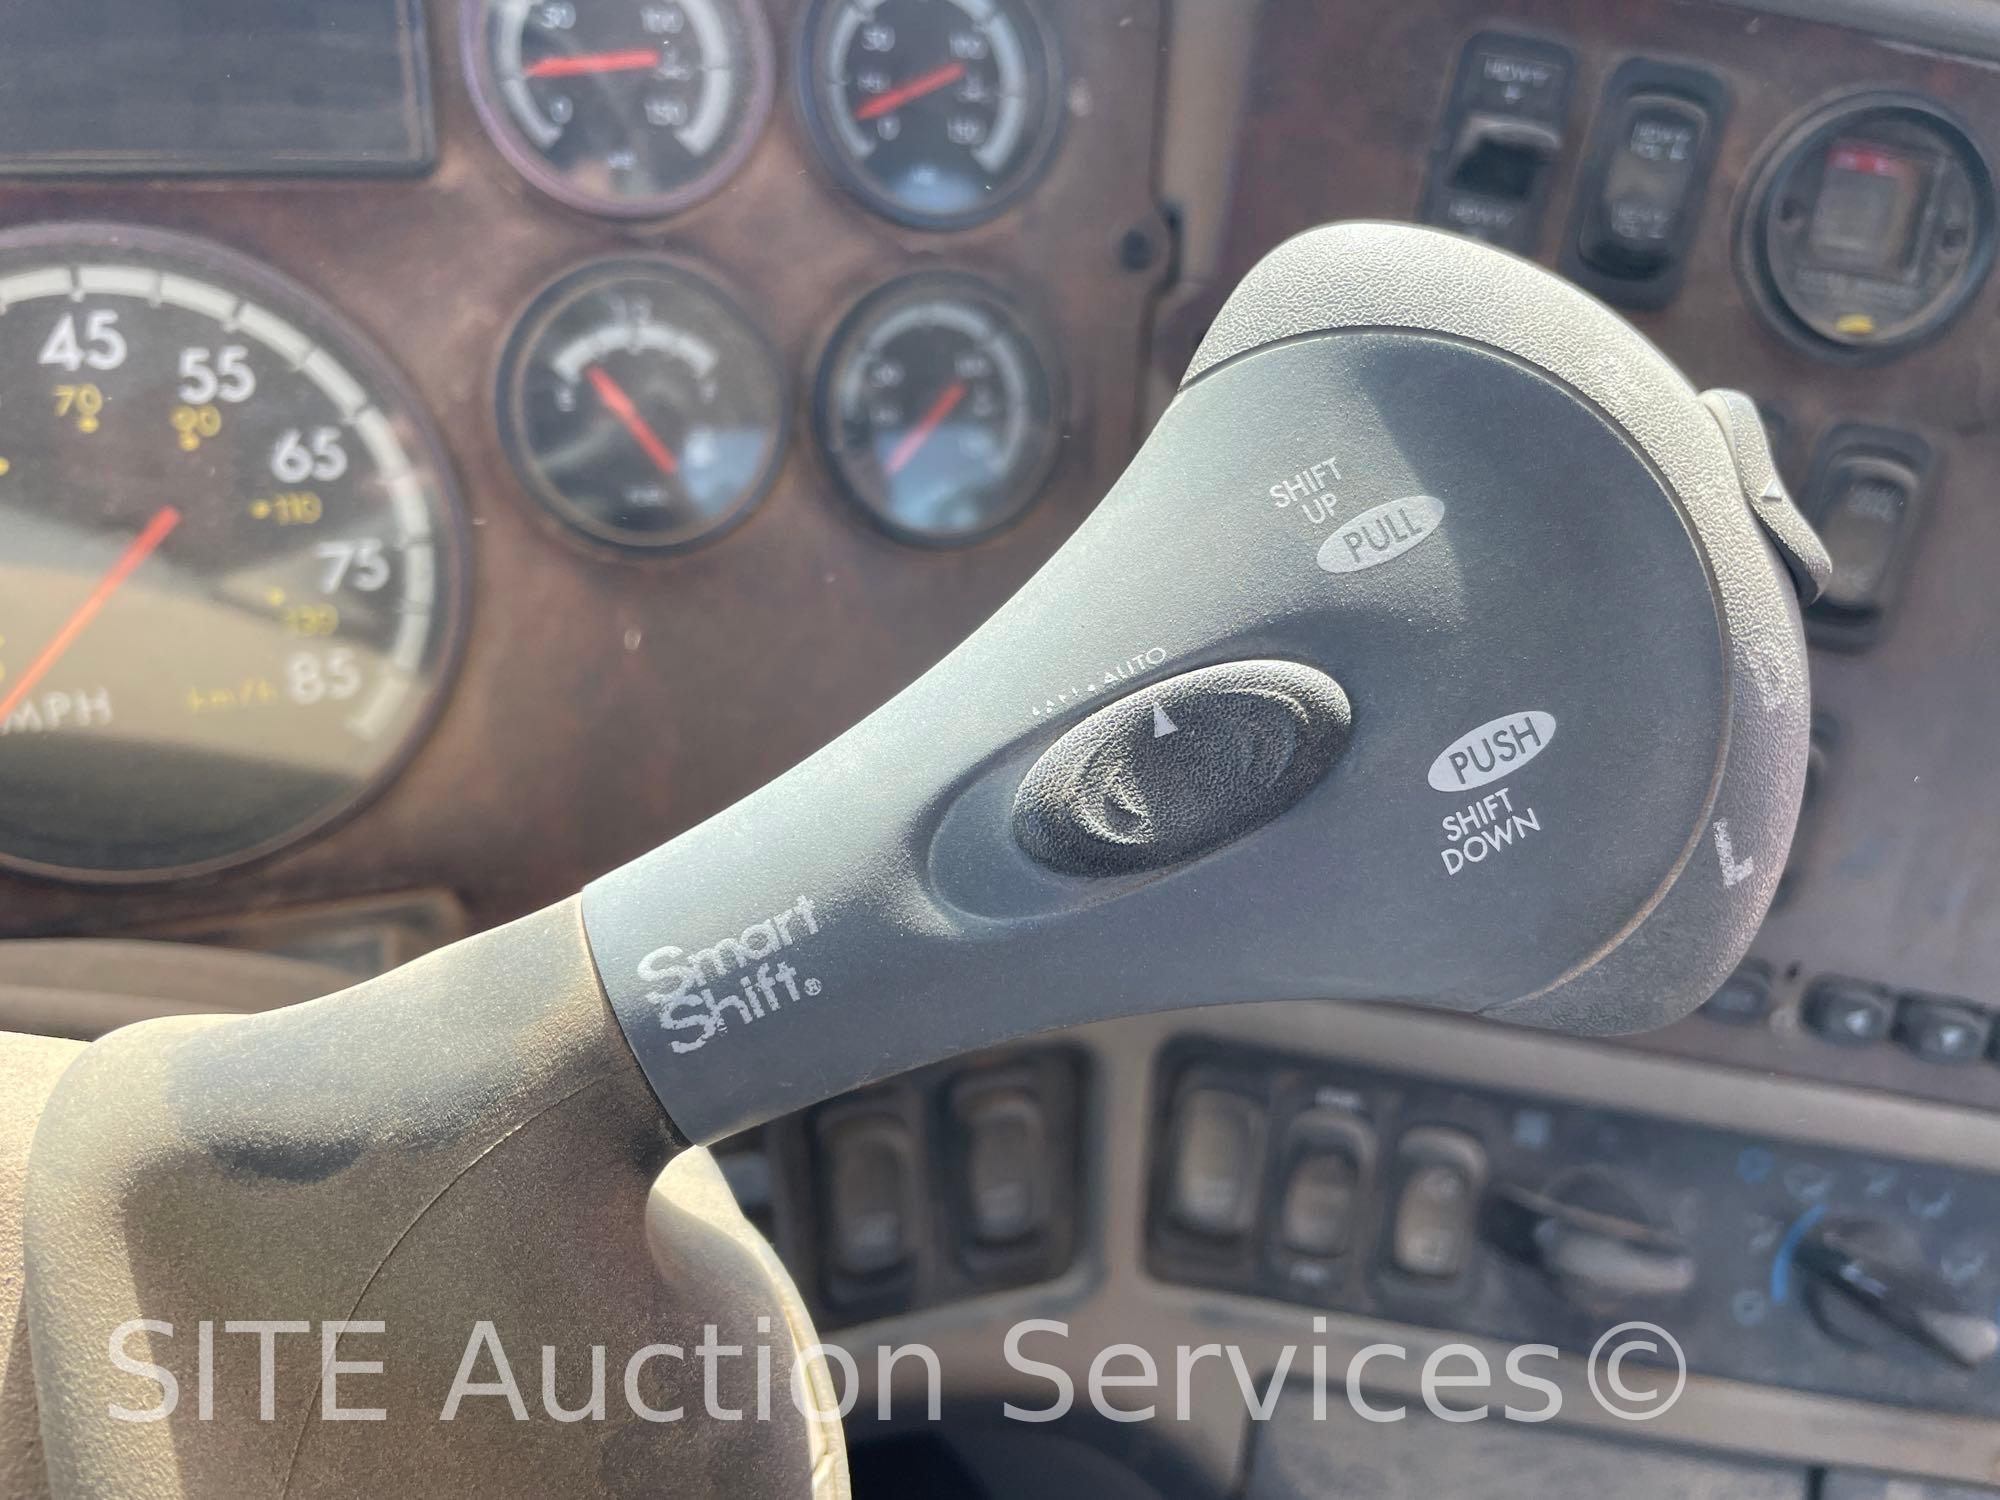 2001 Freightliner ST120 T/A Truck Tractor w/ Winch